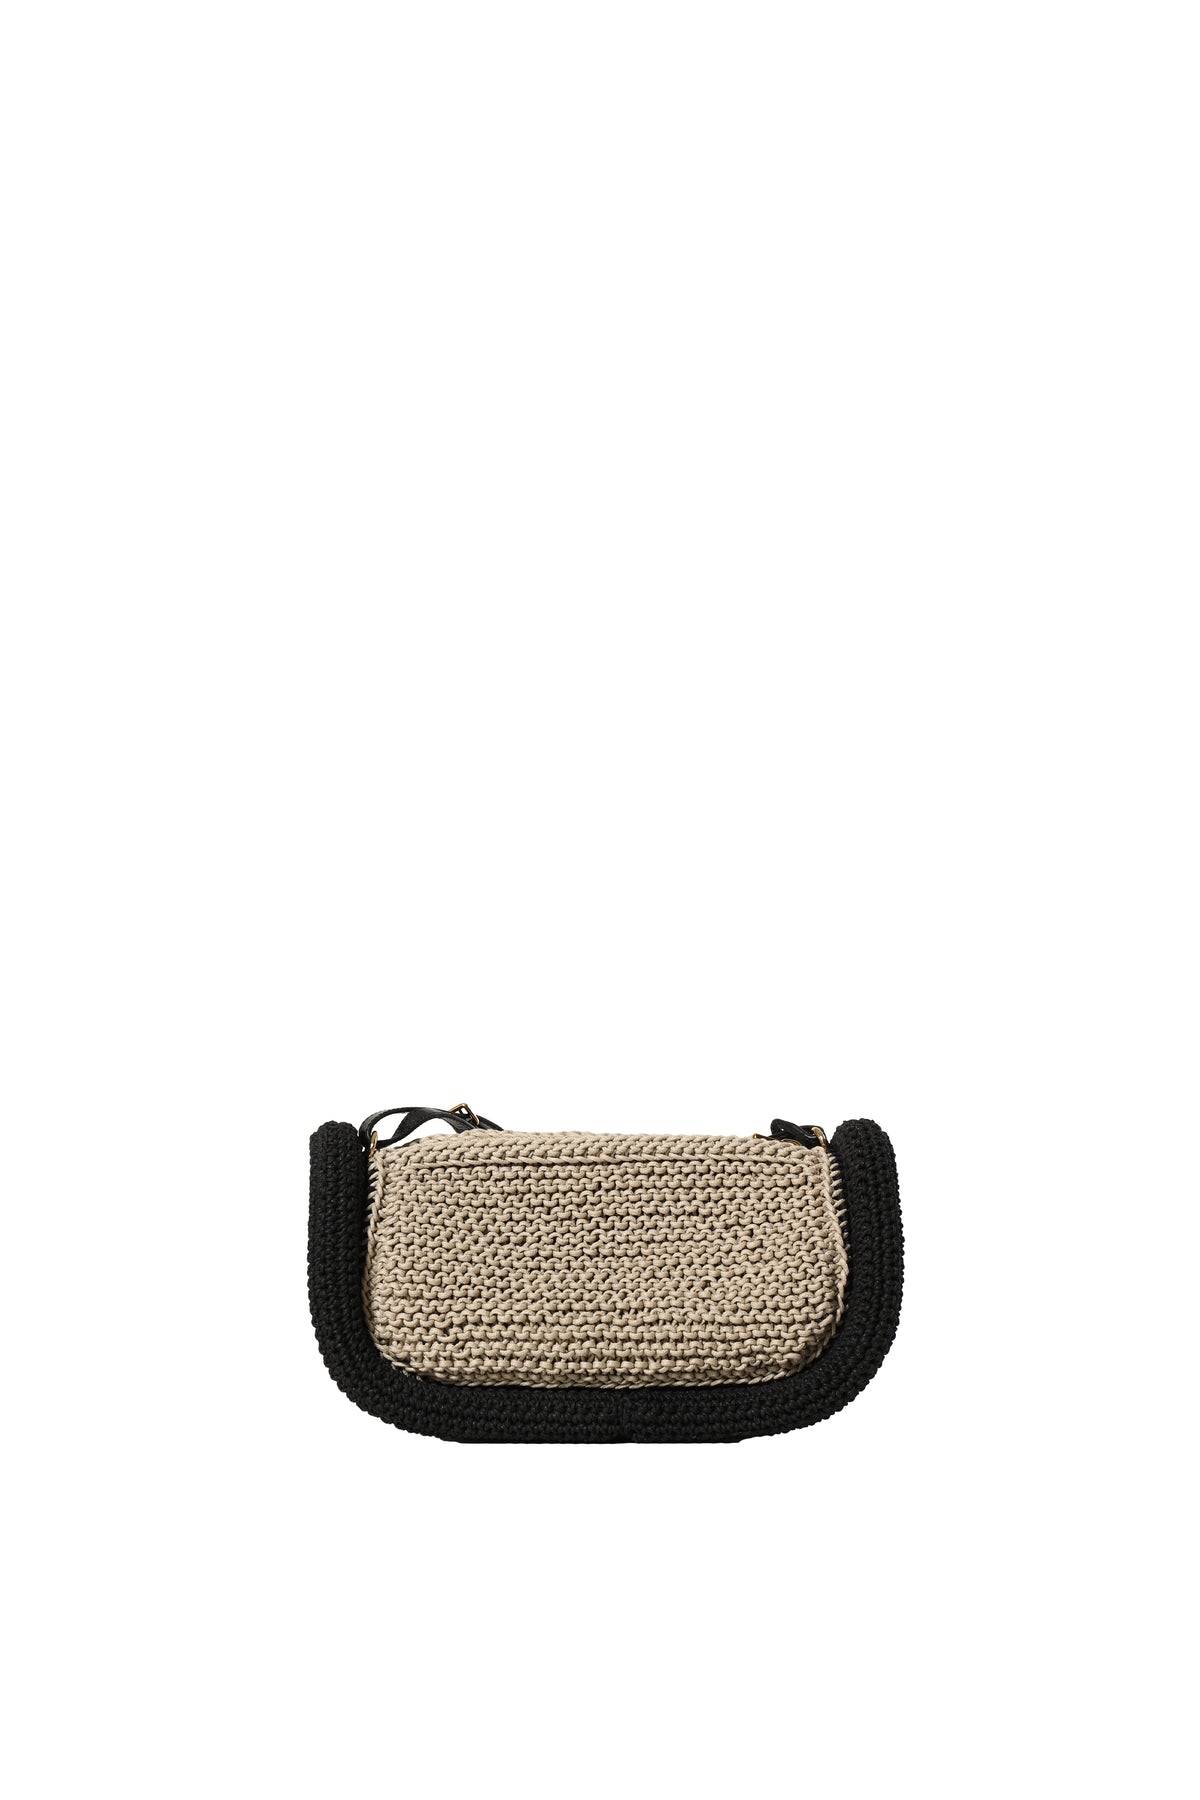 JW Anderson THE BUMPER-15 / BEI BLK